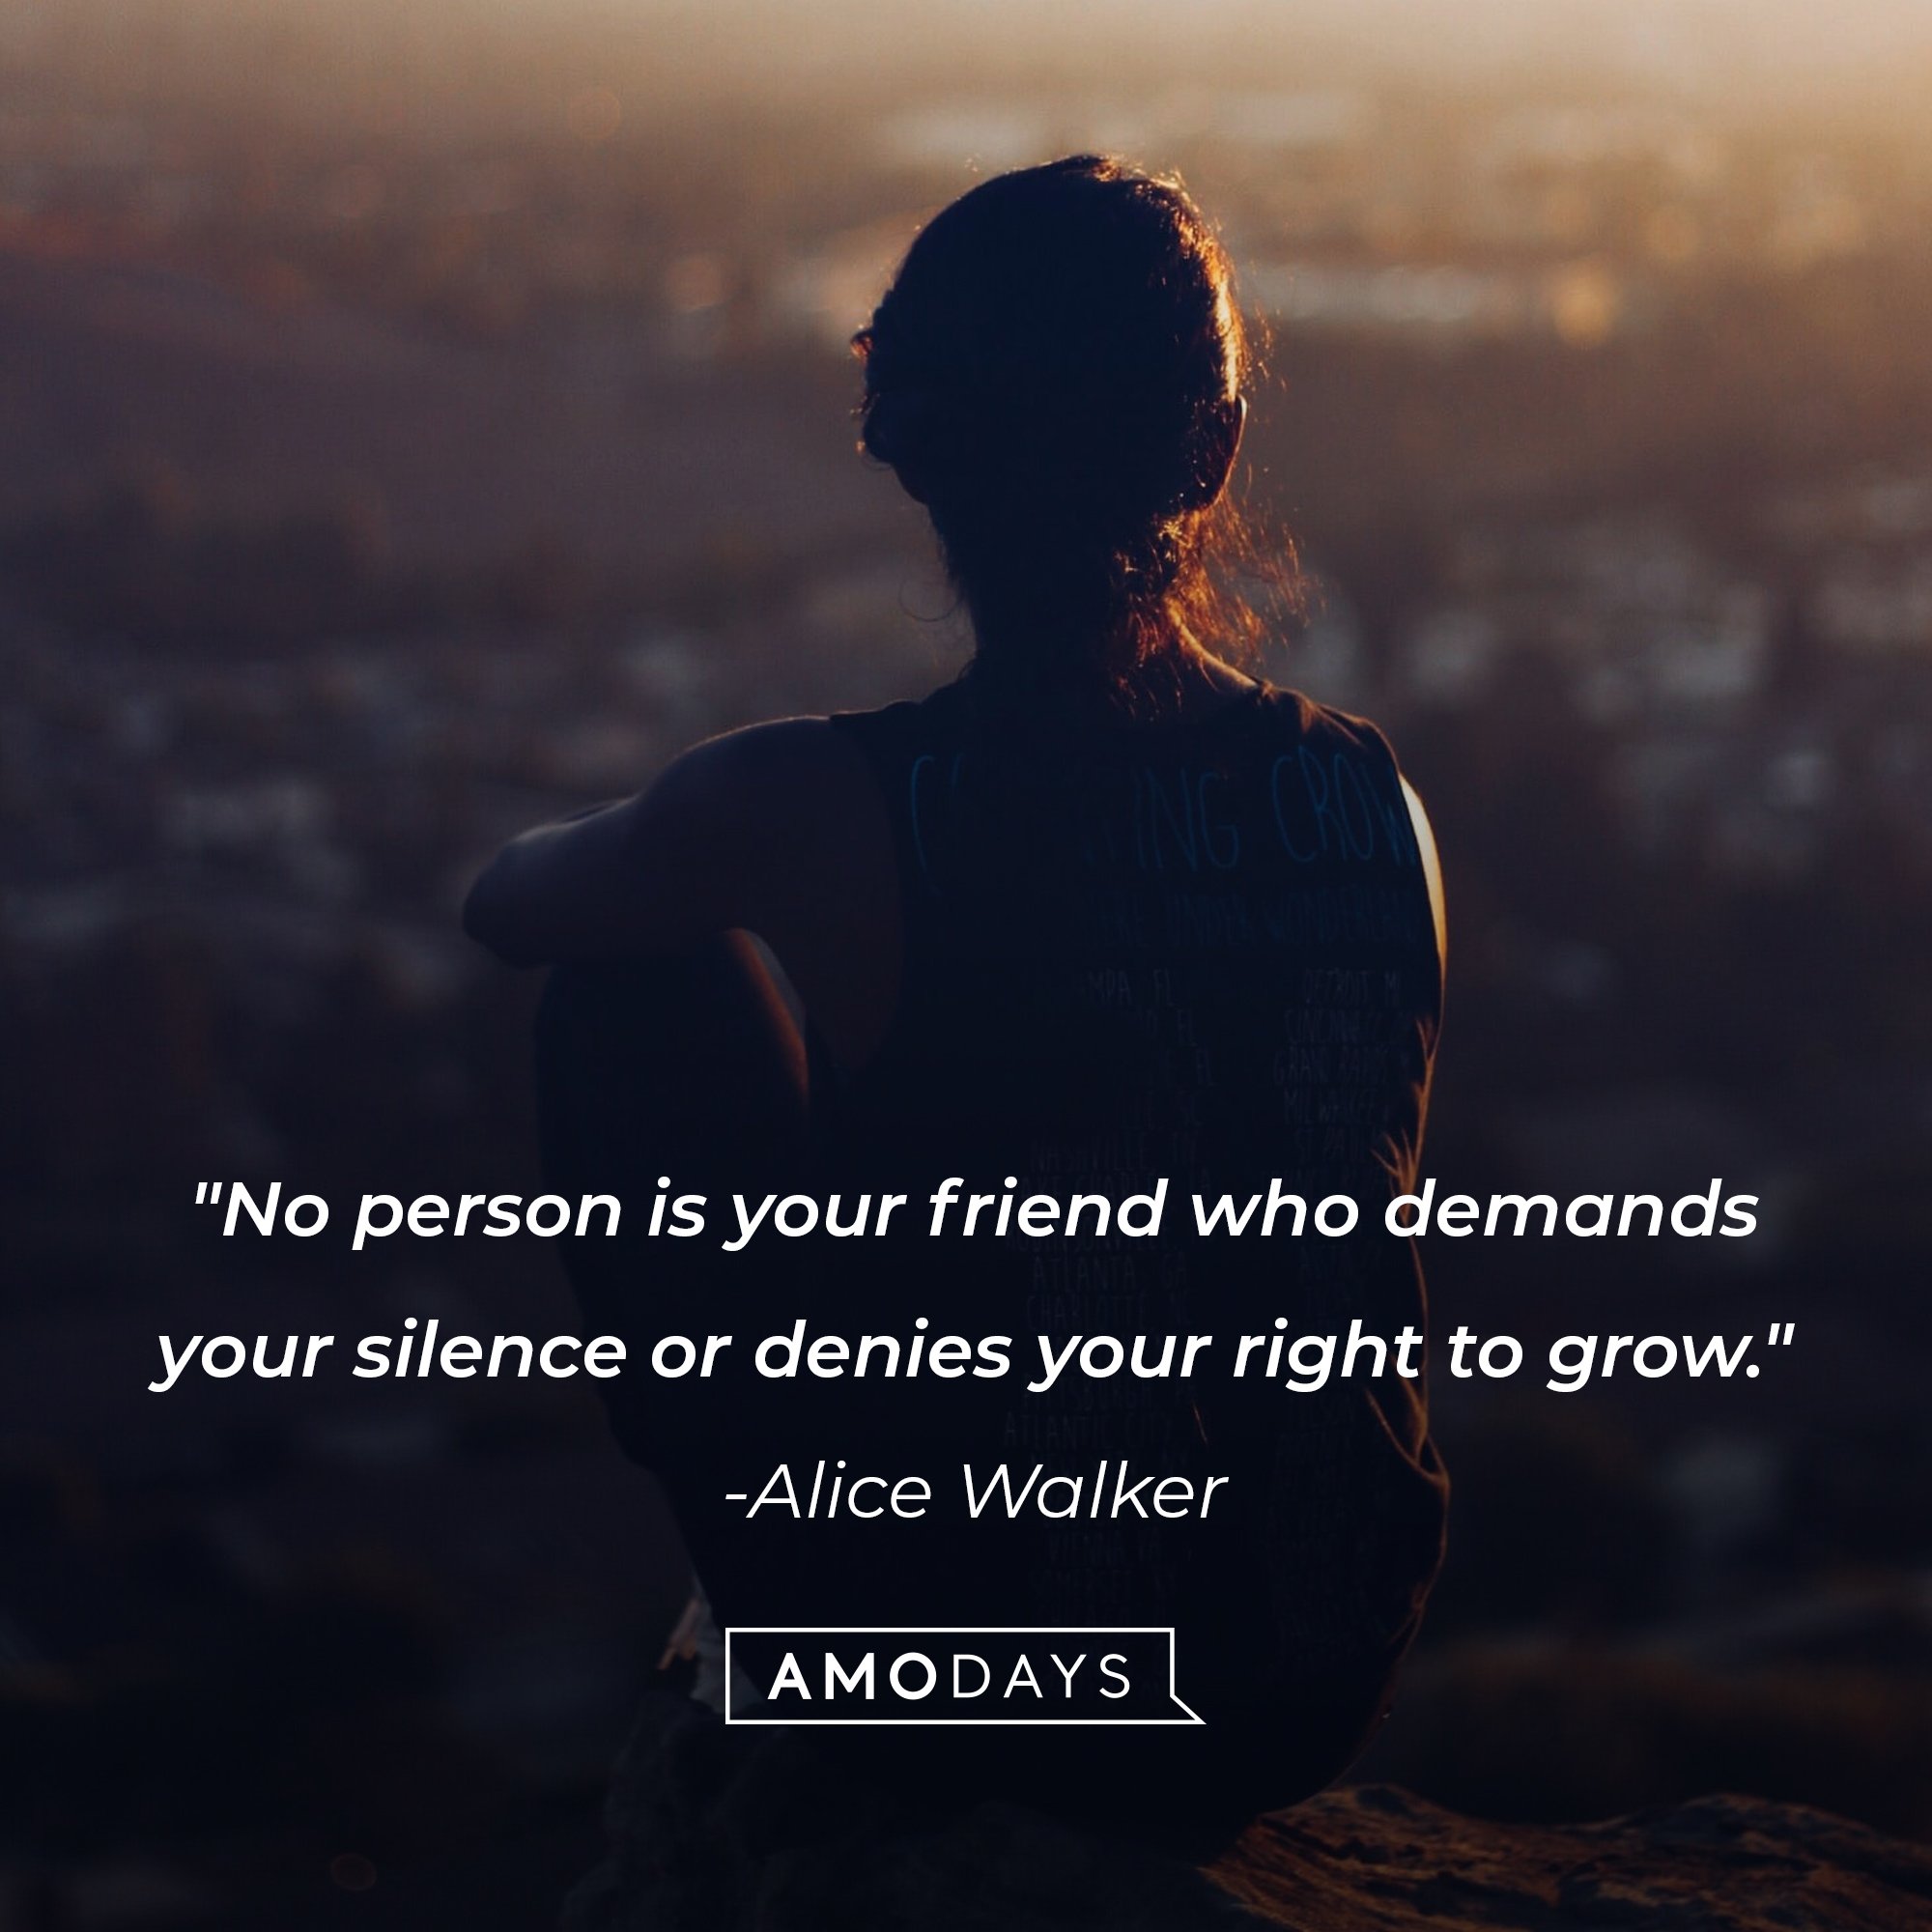 Alice Walker’s quote: "No person is your friend who demands your silence or denies your right to grow." | Image: AmoDays 